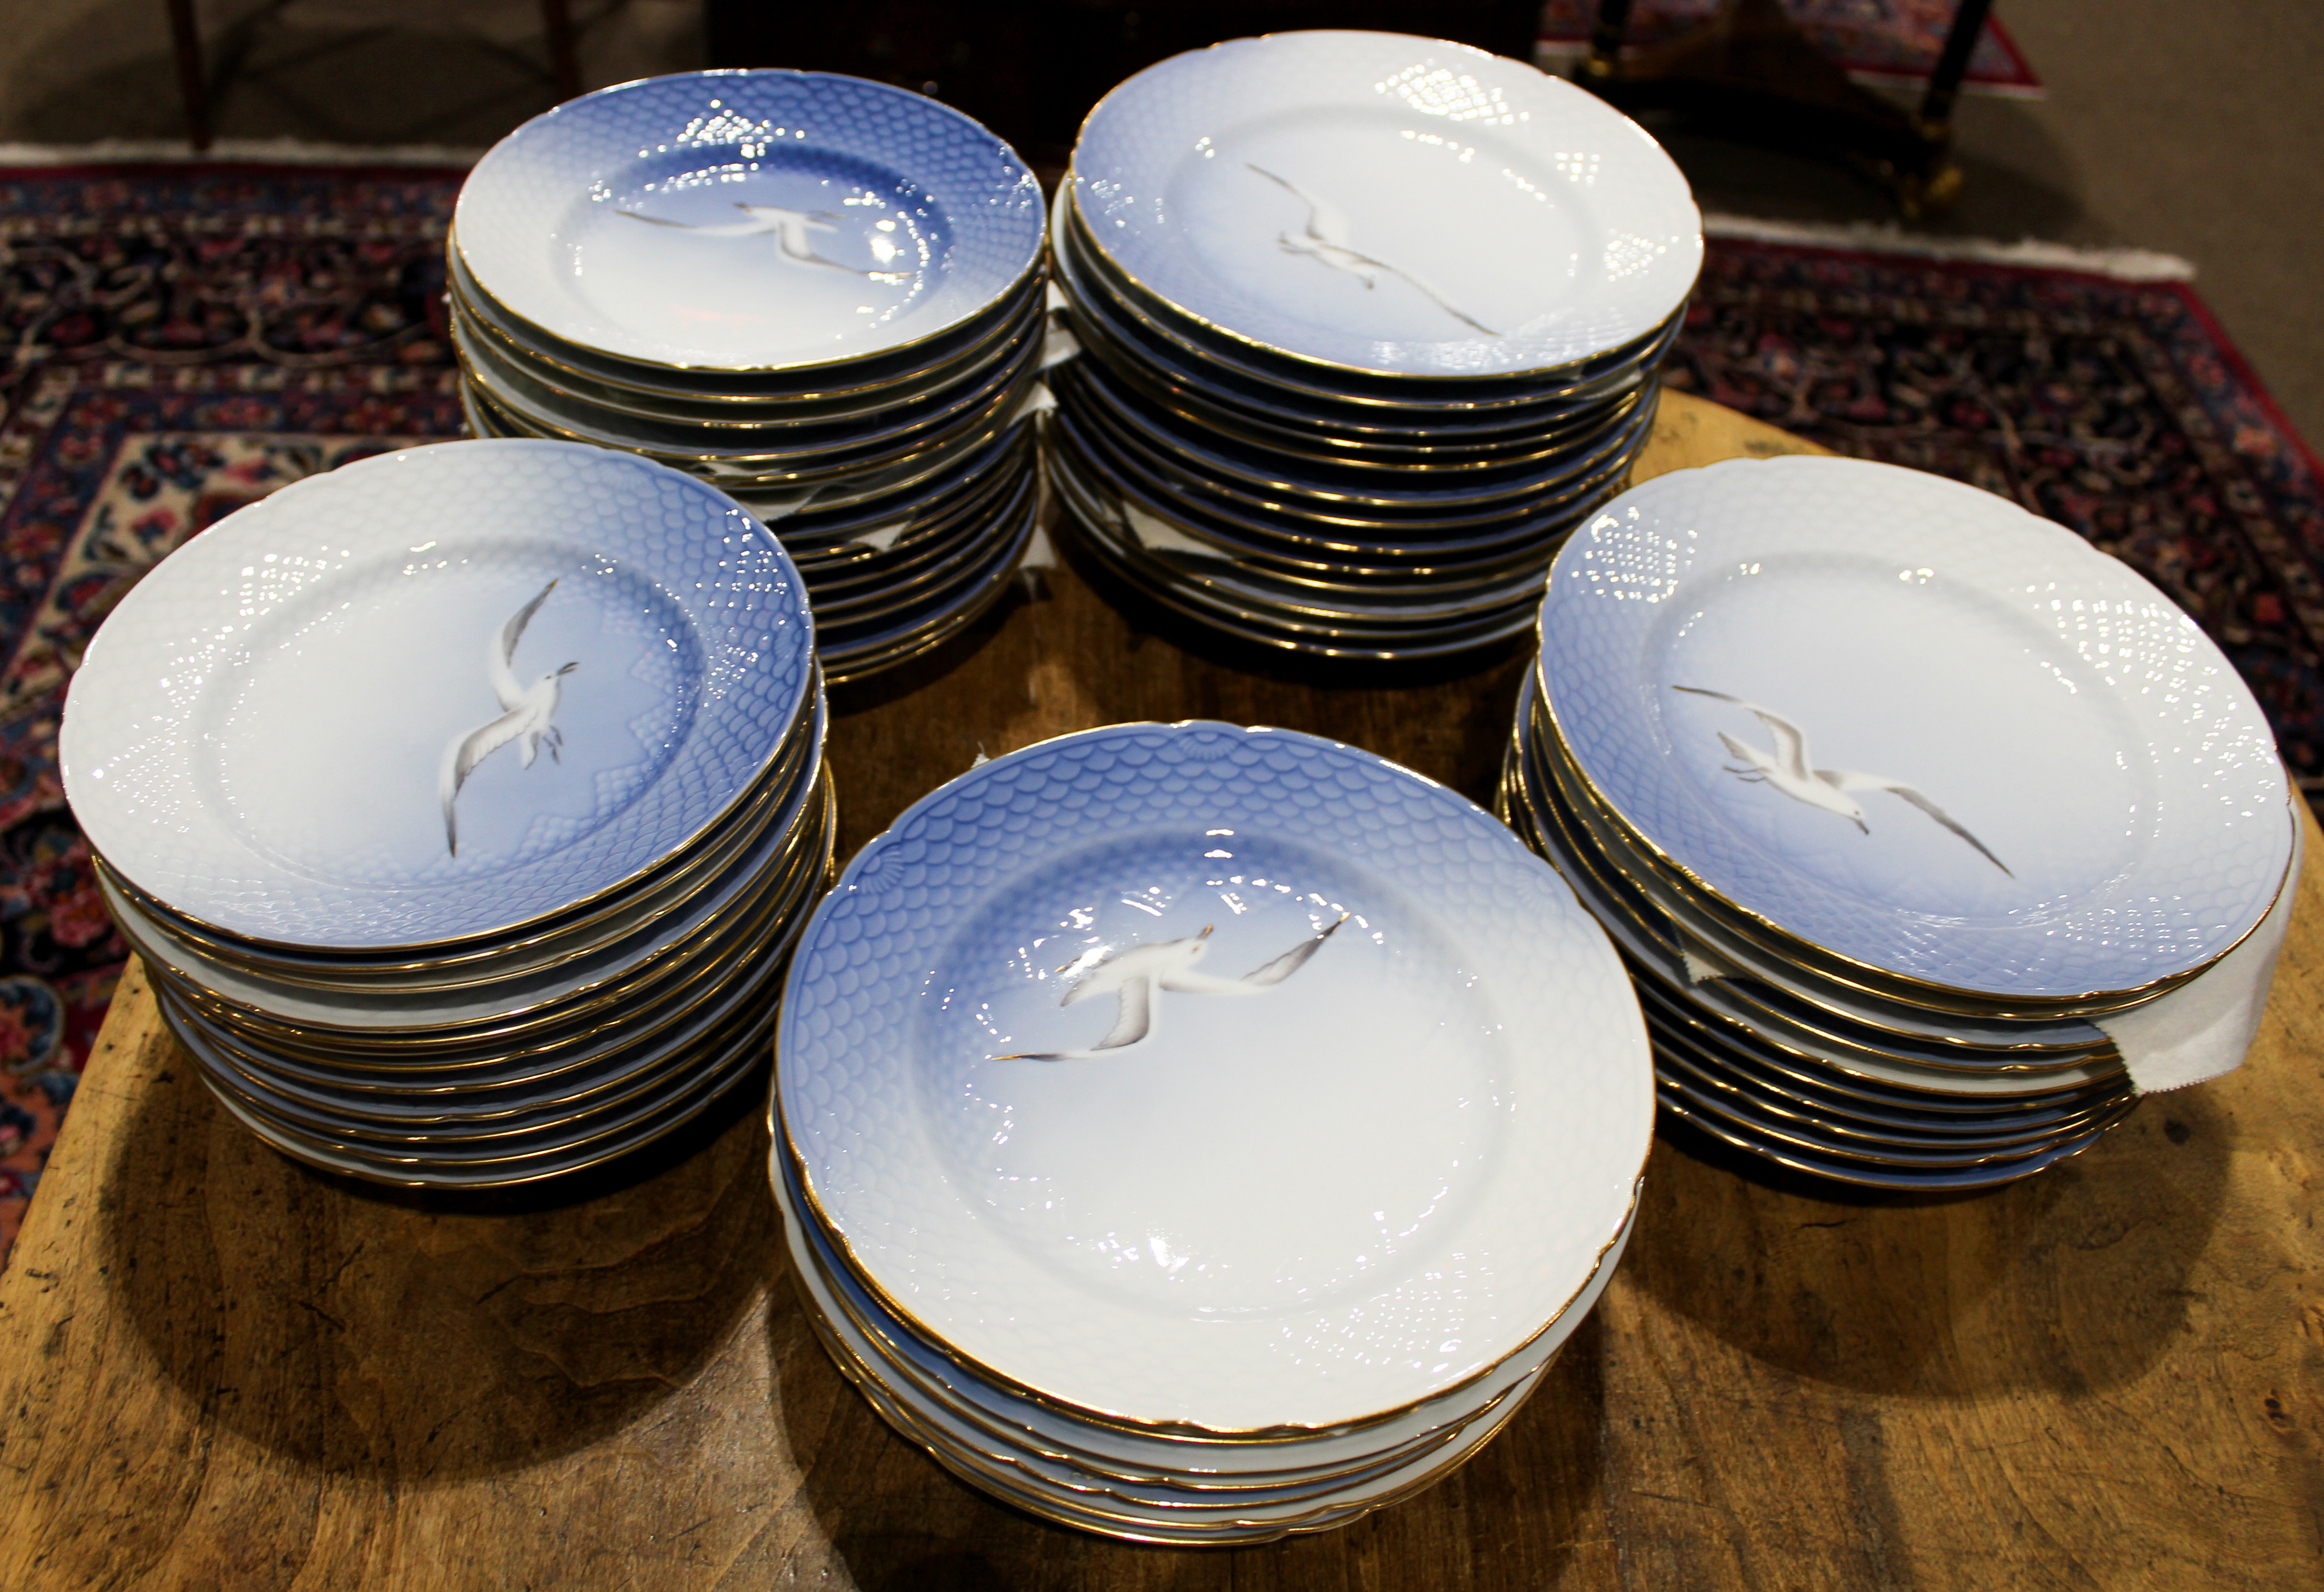 A large Bing and Grondahl (B&G) porcelain Seagull table service - Image 21 of 28